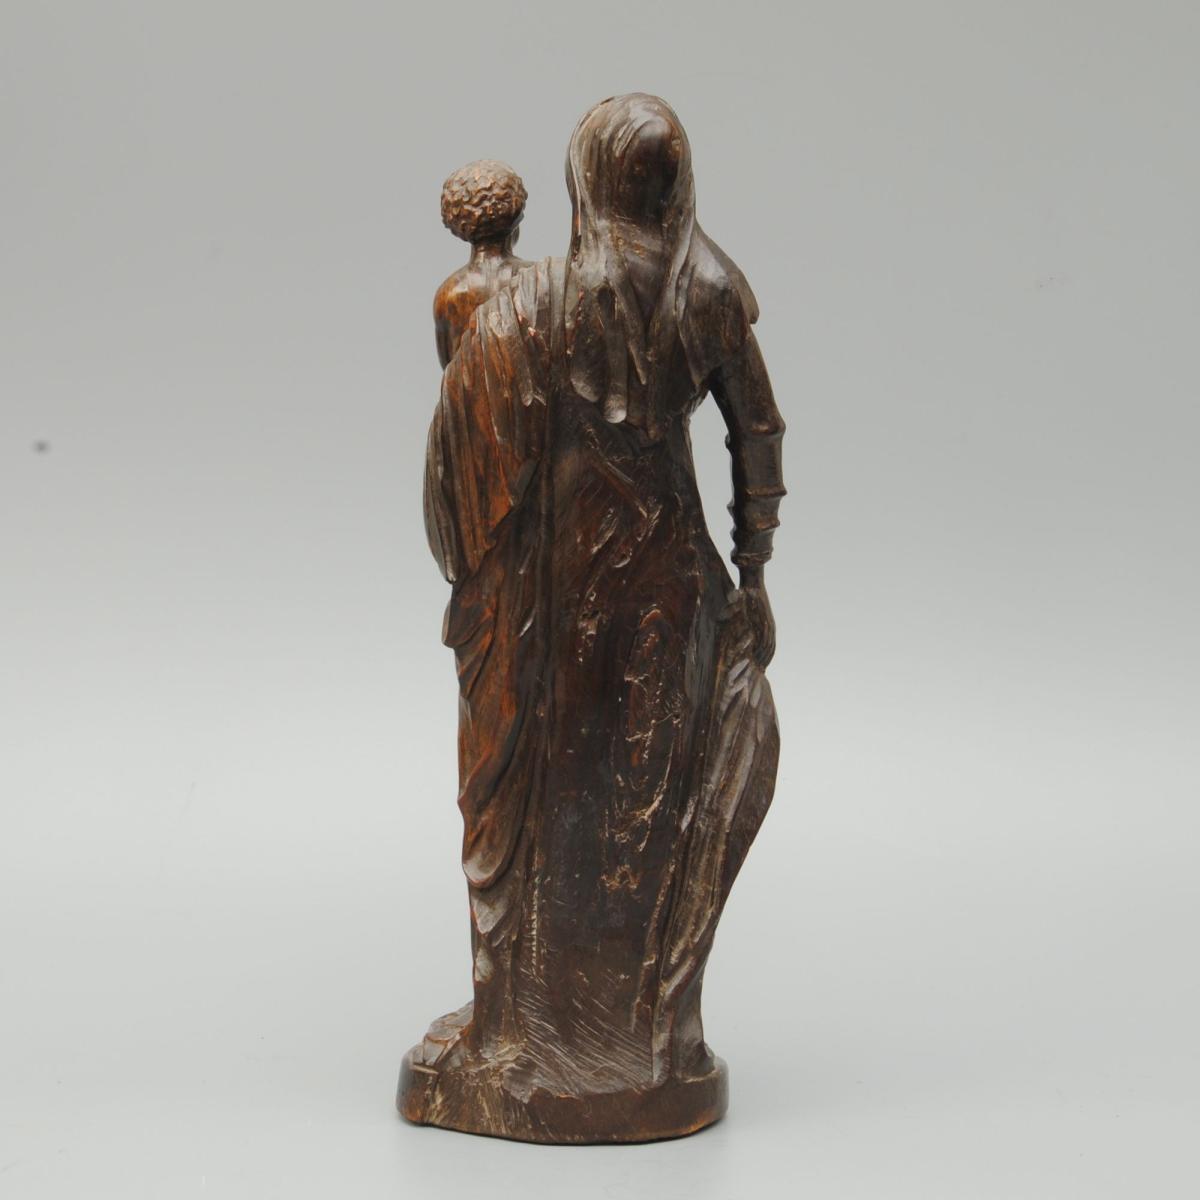 An Unusual 18th Century Hardwood Carving of Madonna and Child